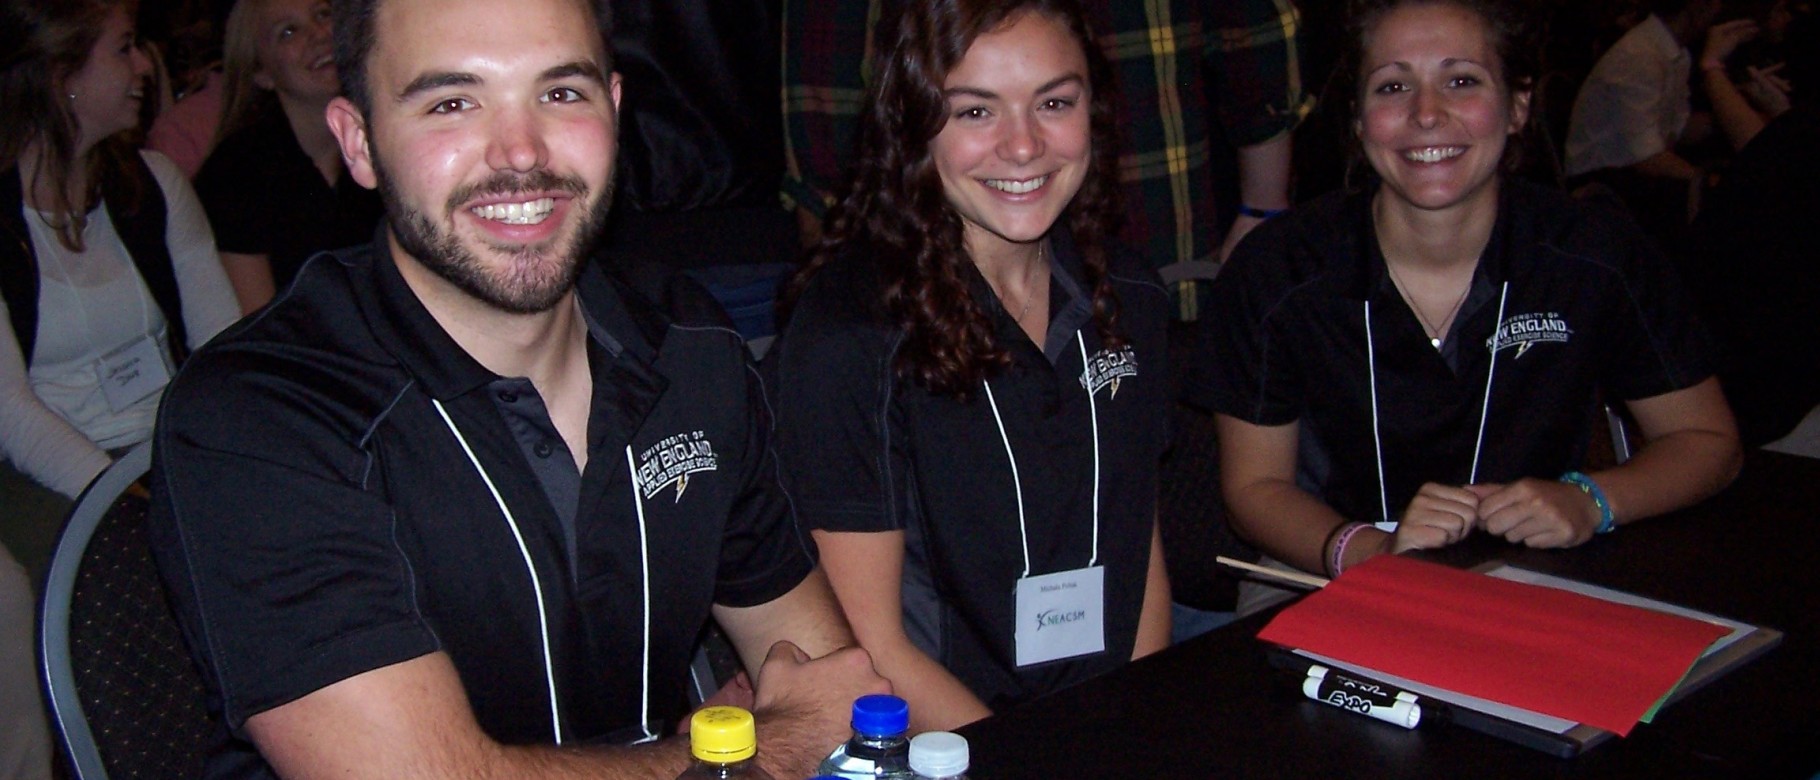 Rob Downing, Michala Peltak and Samantha Gagne, placed second overall in the quiz bowl